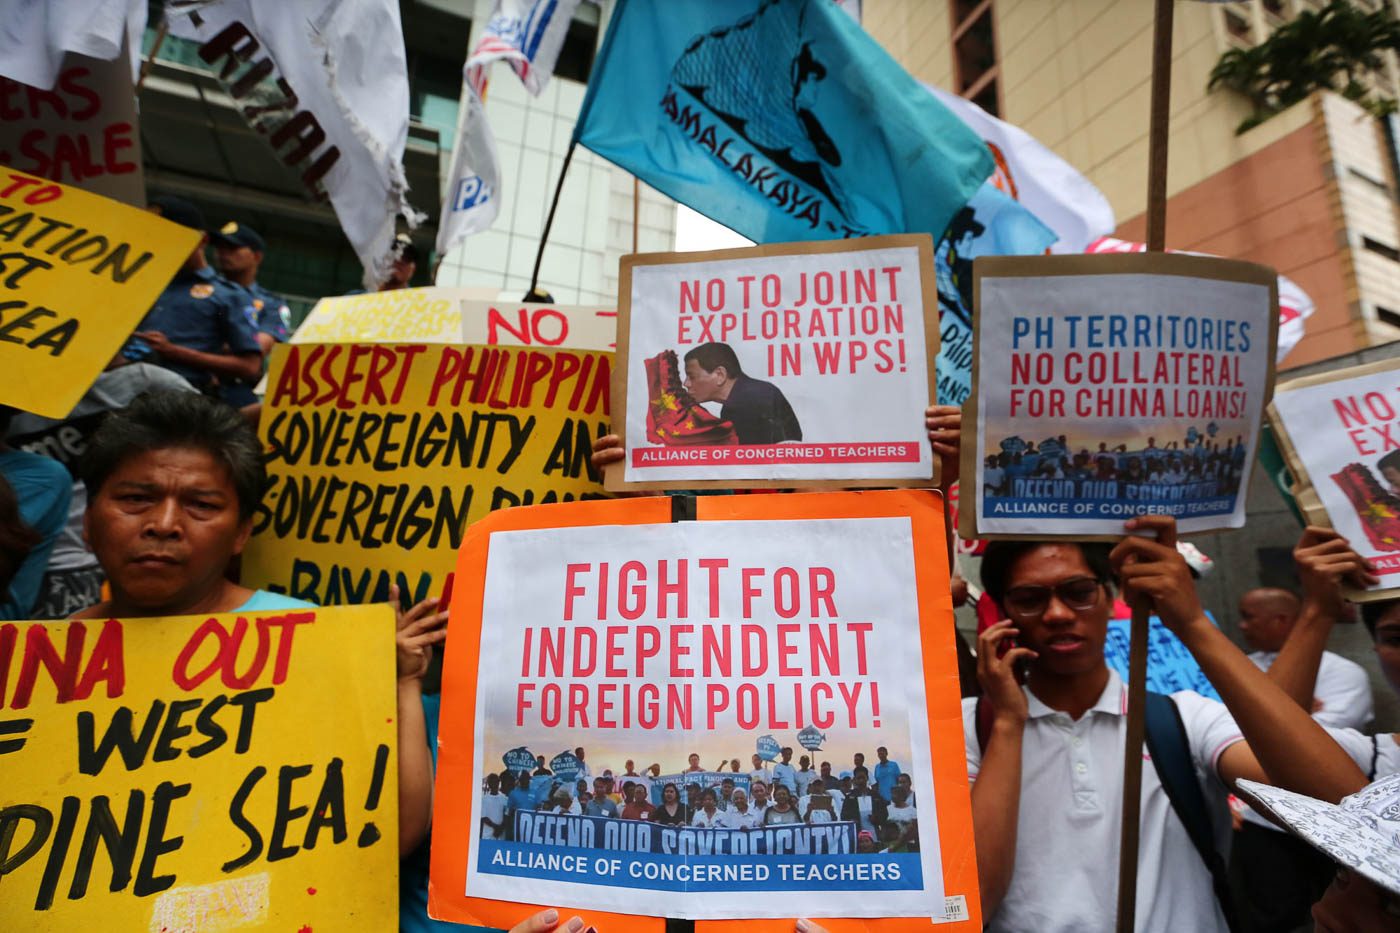 INDEPENDENCE. Signs fighting for independent foreign policy can be seen in a protest at the Chinese Consulate during Xi Jinping's PH state visit on Tuesday, November 20. Photo by Jire Carreon/Rappler 